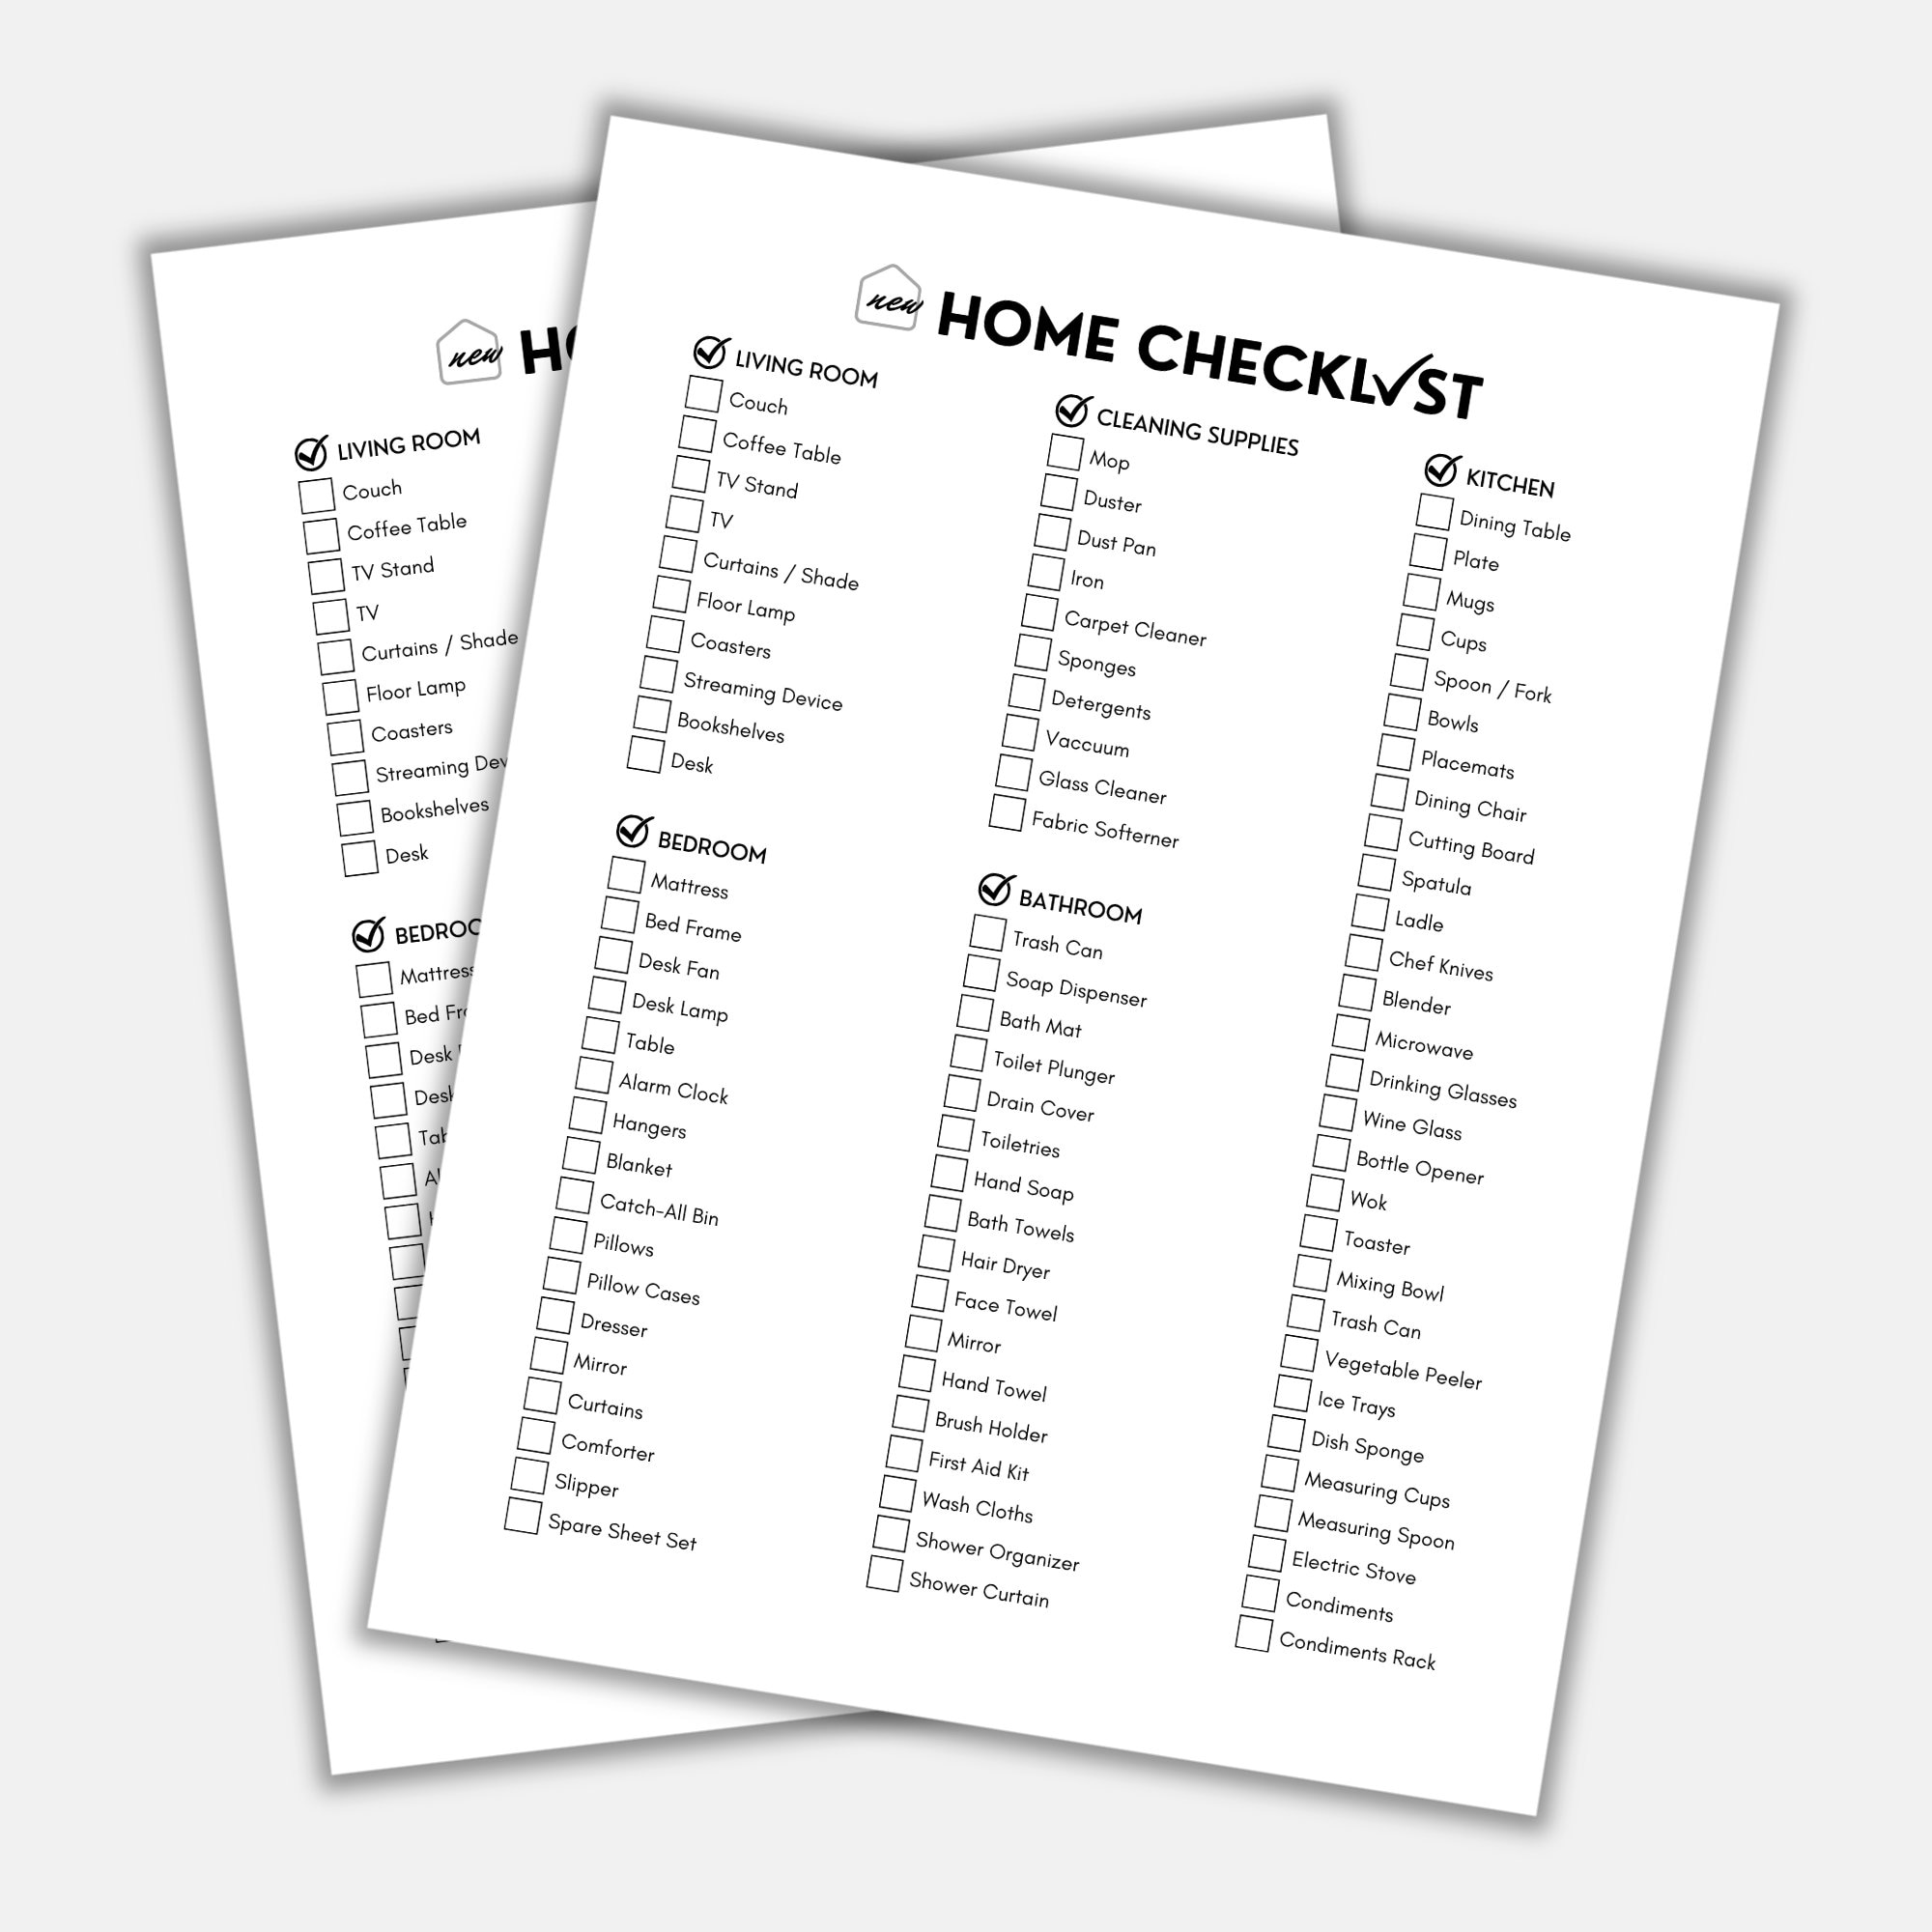 Moving part 5: Family's first night in new house checklist – House Mix